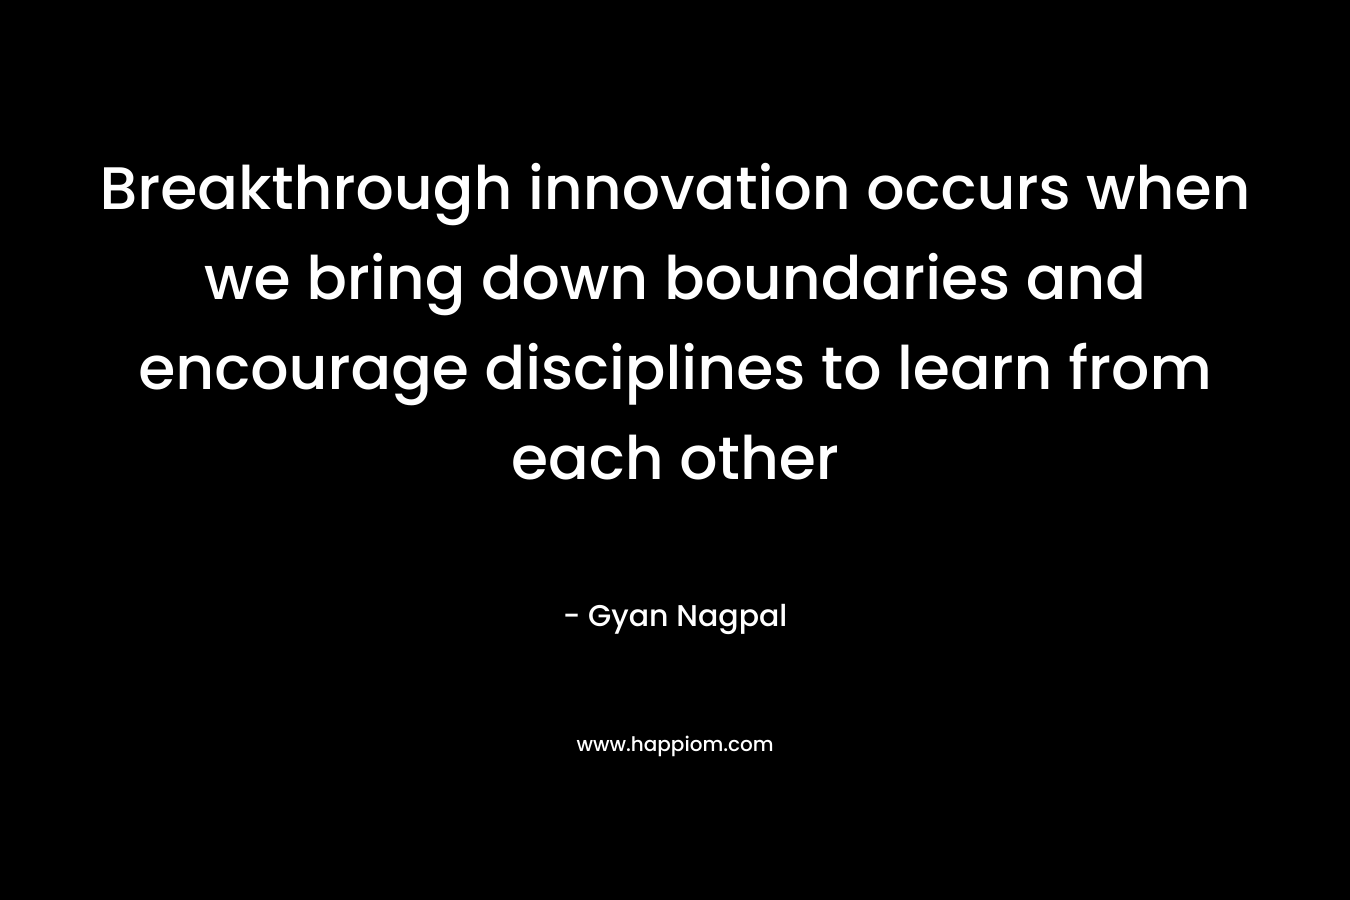 Breakthrough innovation occurs when we bring down boundaries and encourage disciplines to learn from each other – Gyan Nagpal